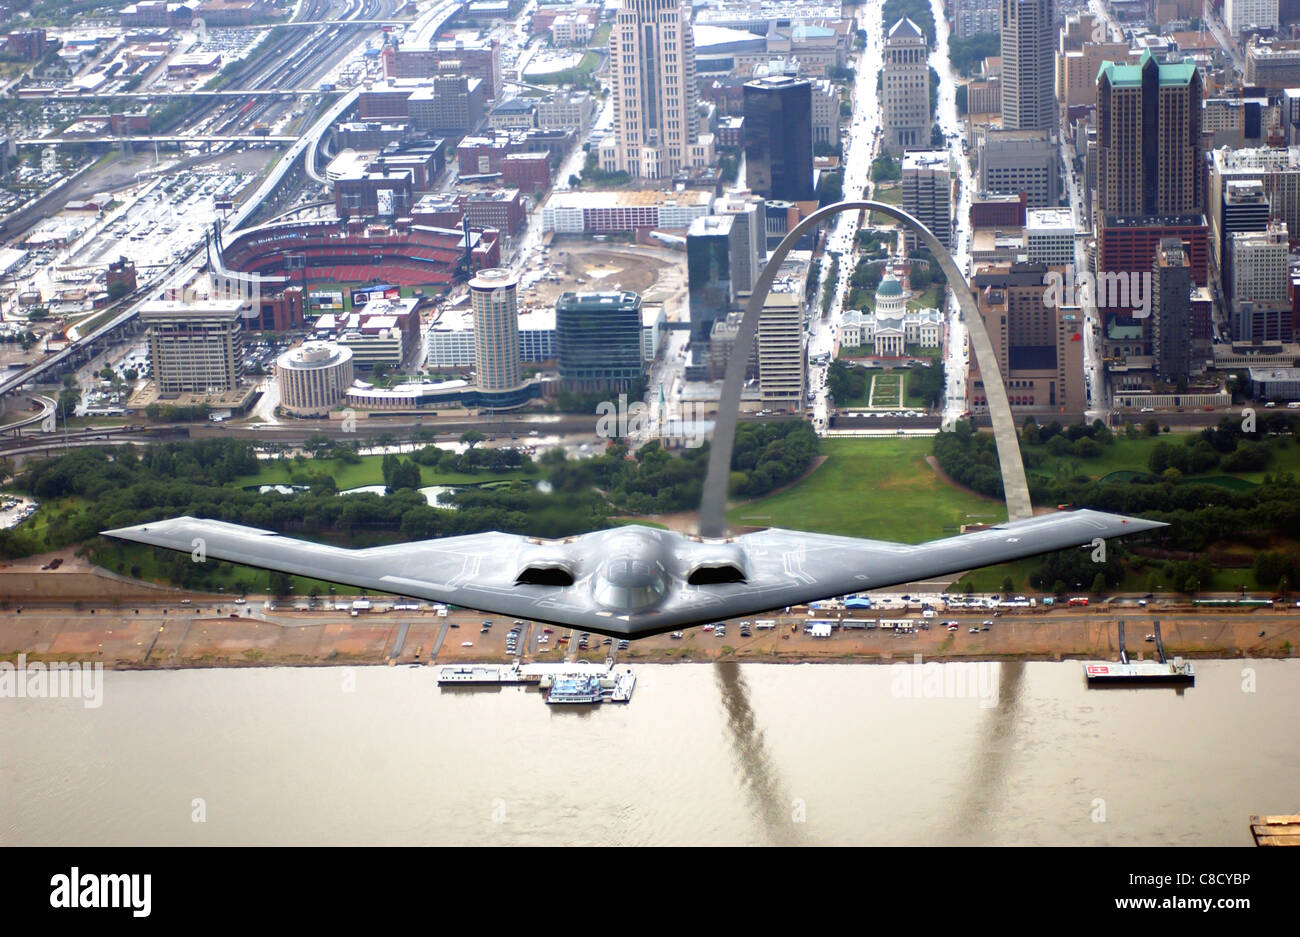 B 2 Spirit Stealth Bomber flying over the St. Louis Arch Stock Photo